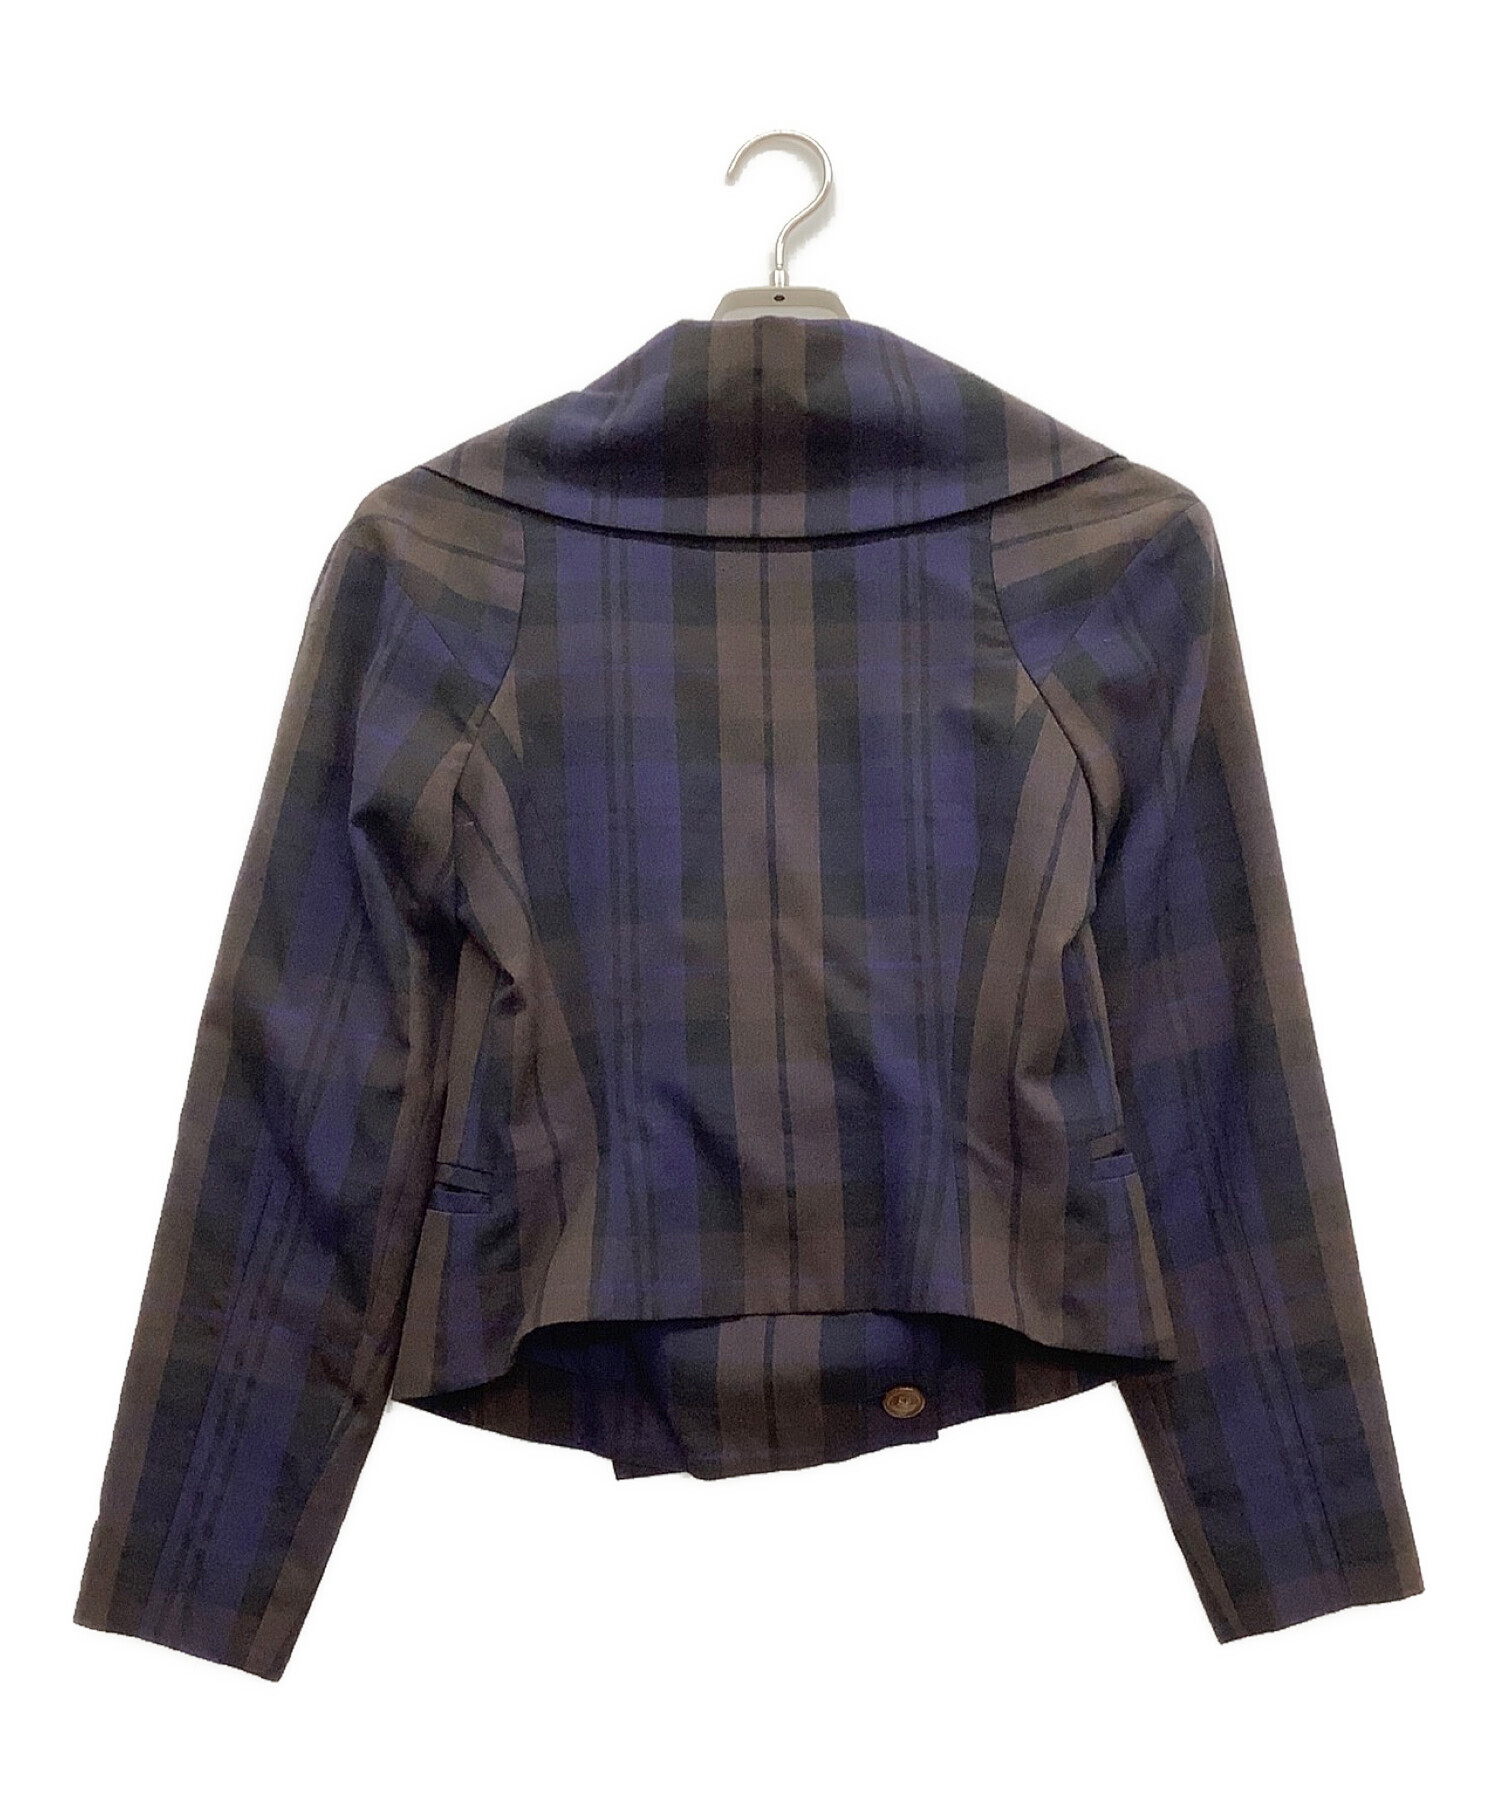 vivienne westwood red label 変形チェックセットアップ-